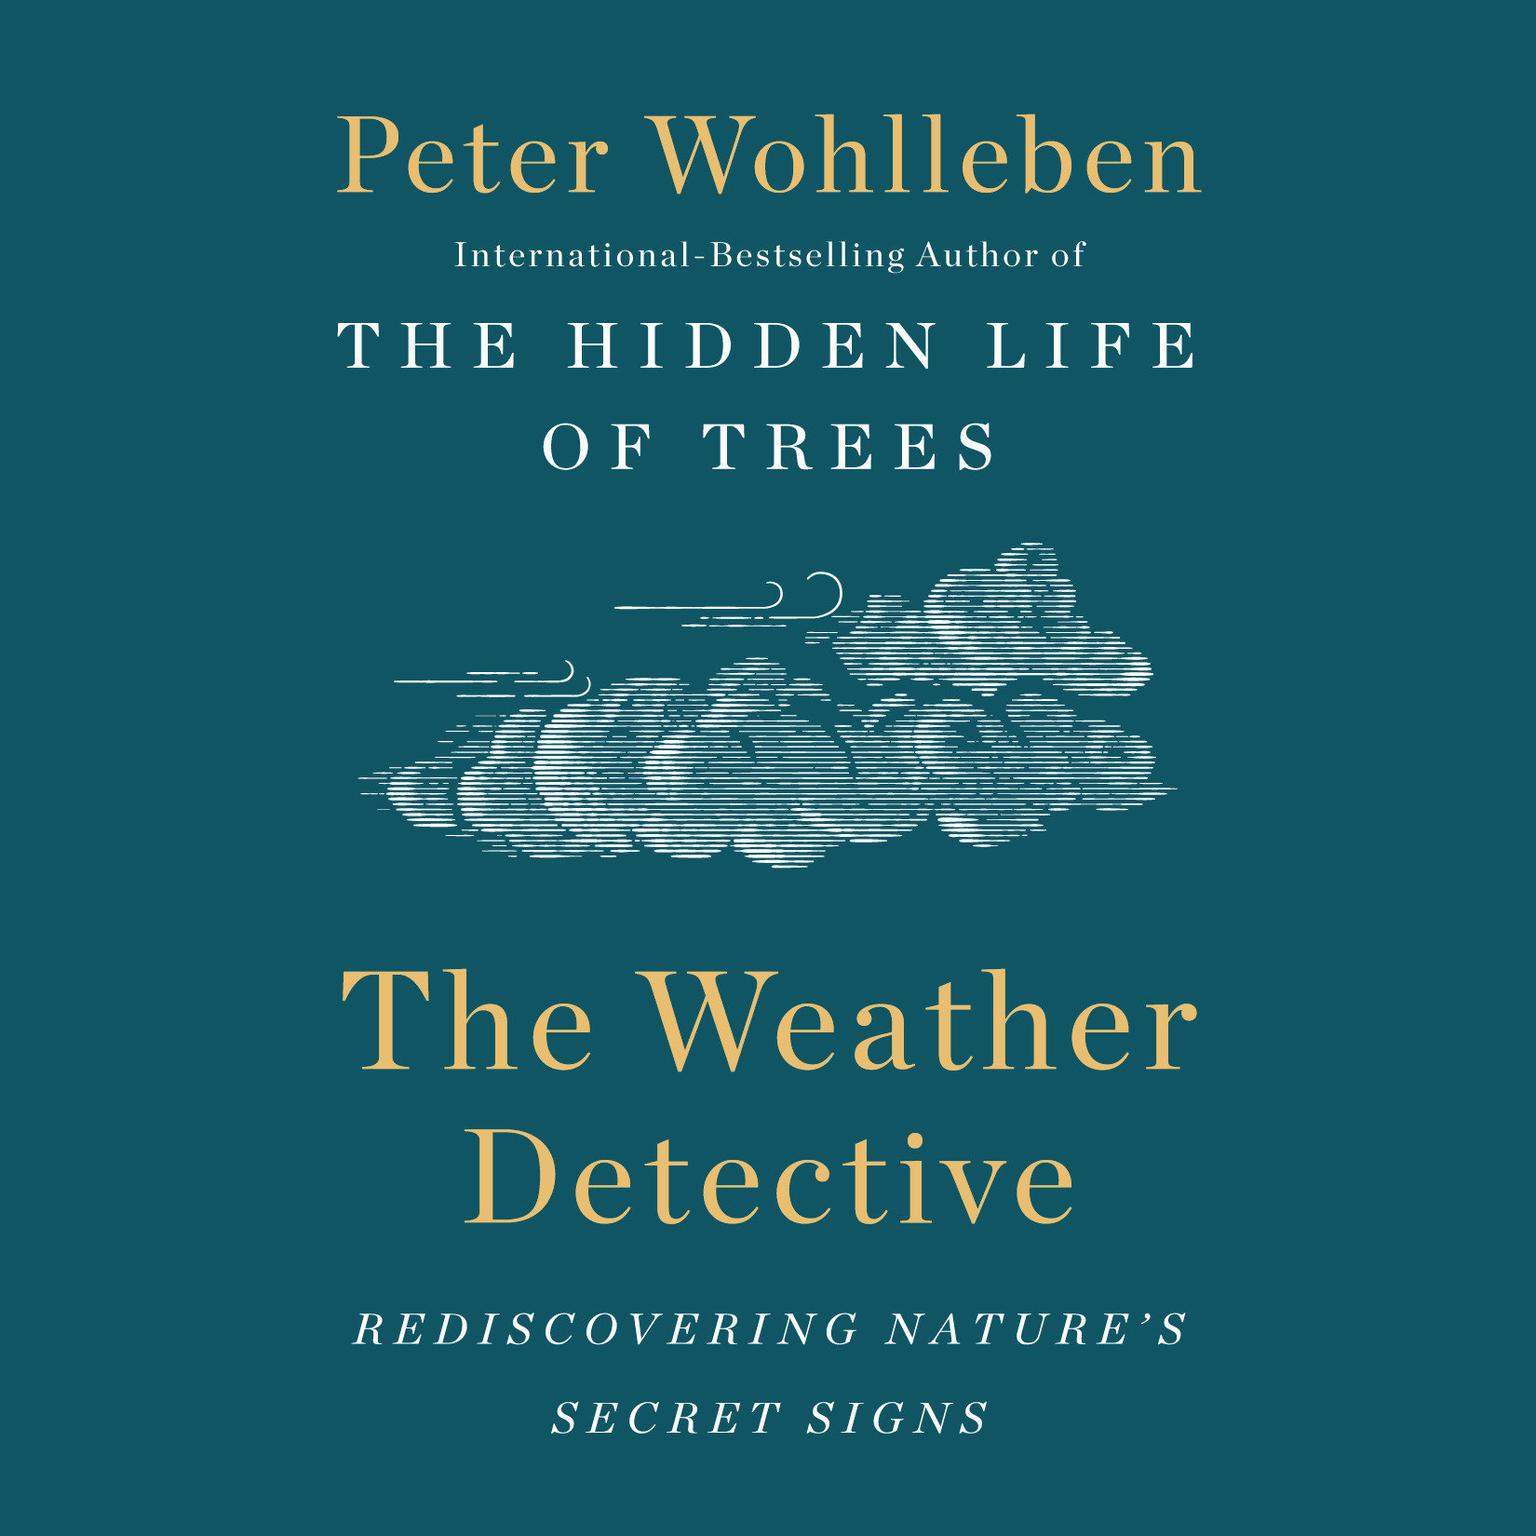 The Weather Detective: Rediscovering Natures Secret Signs Audiobook, by Peter Wohlleben